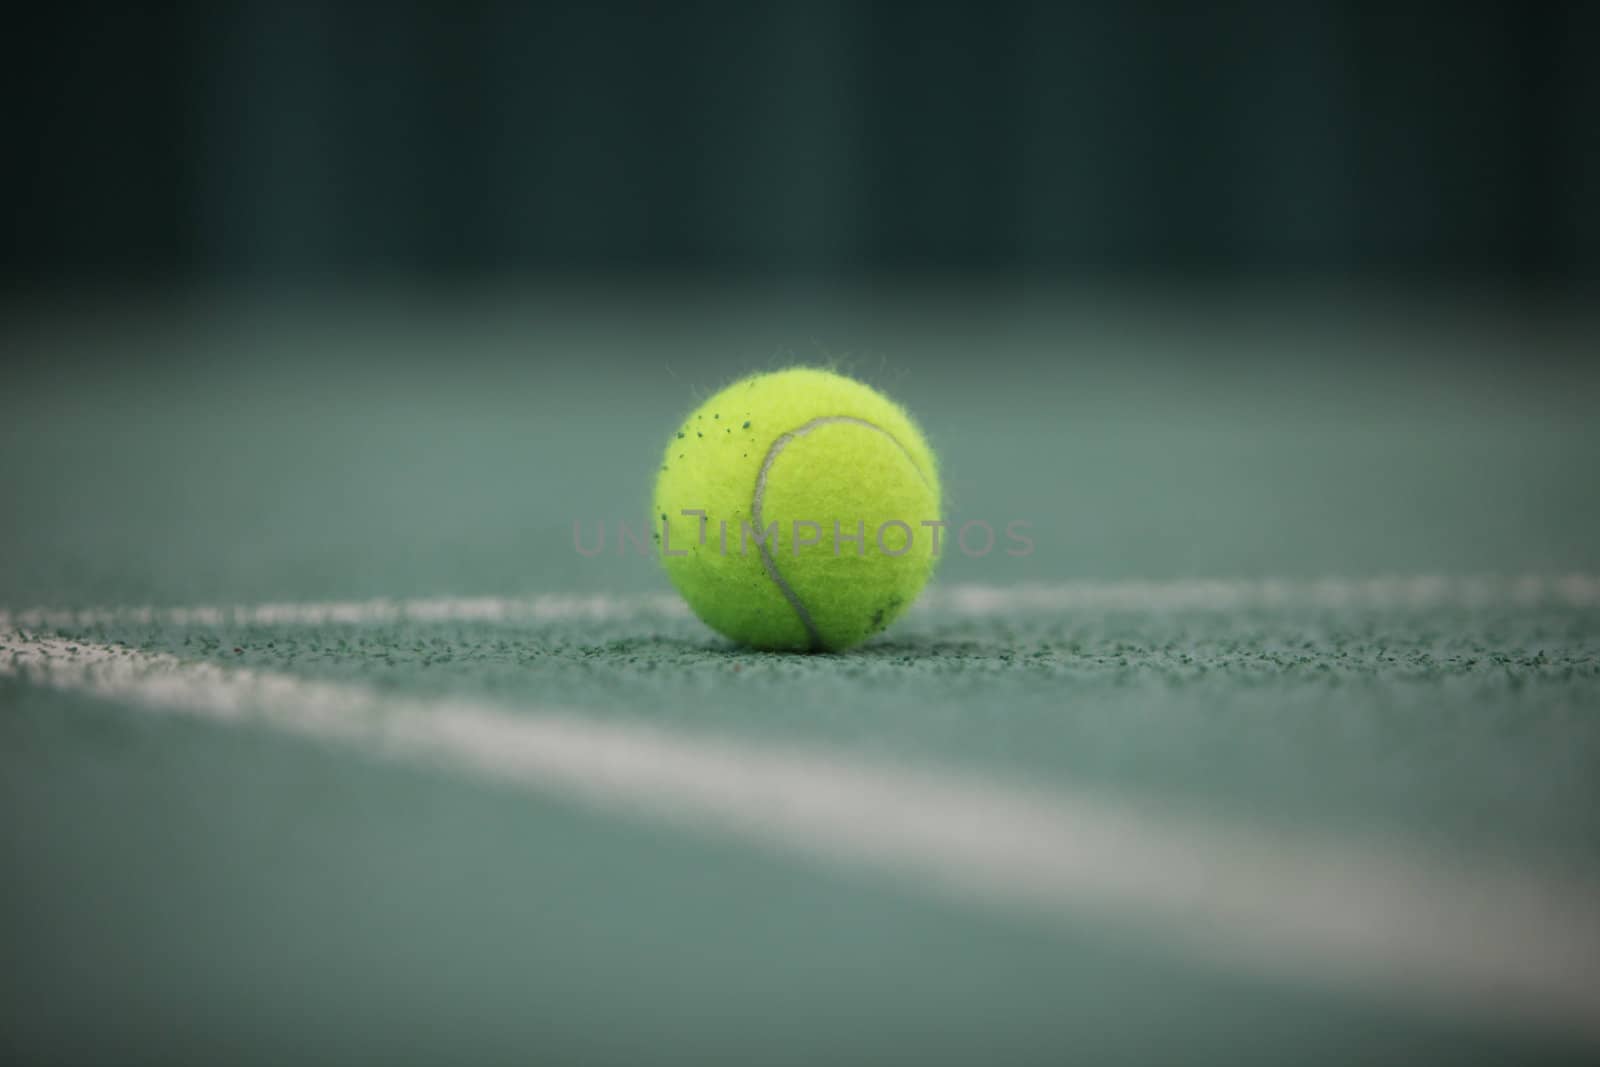 Close up of a tennis ball in the foreground by Farina6000